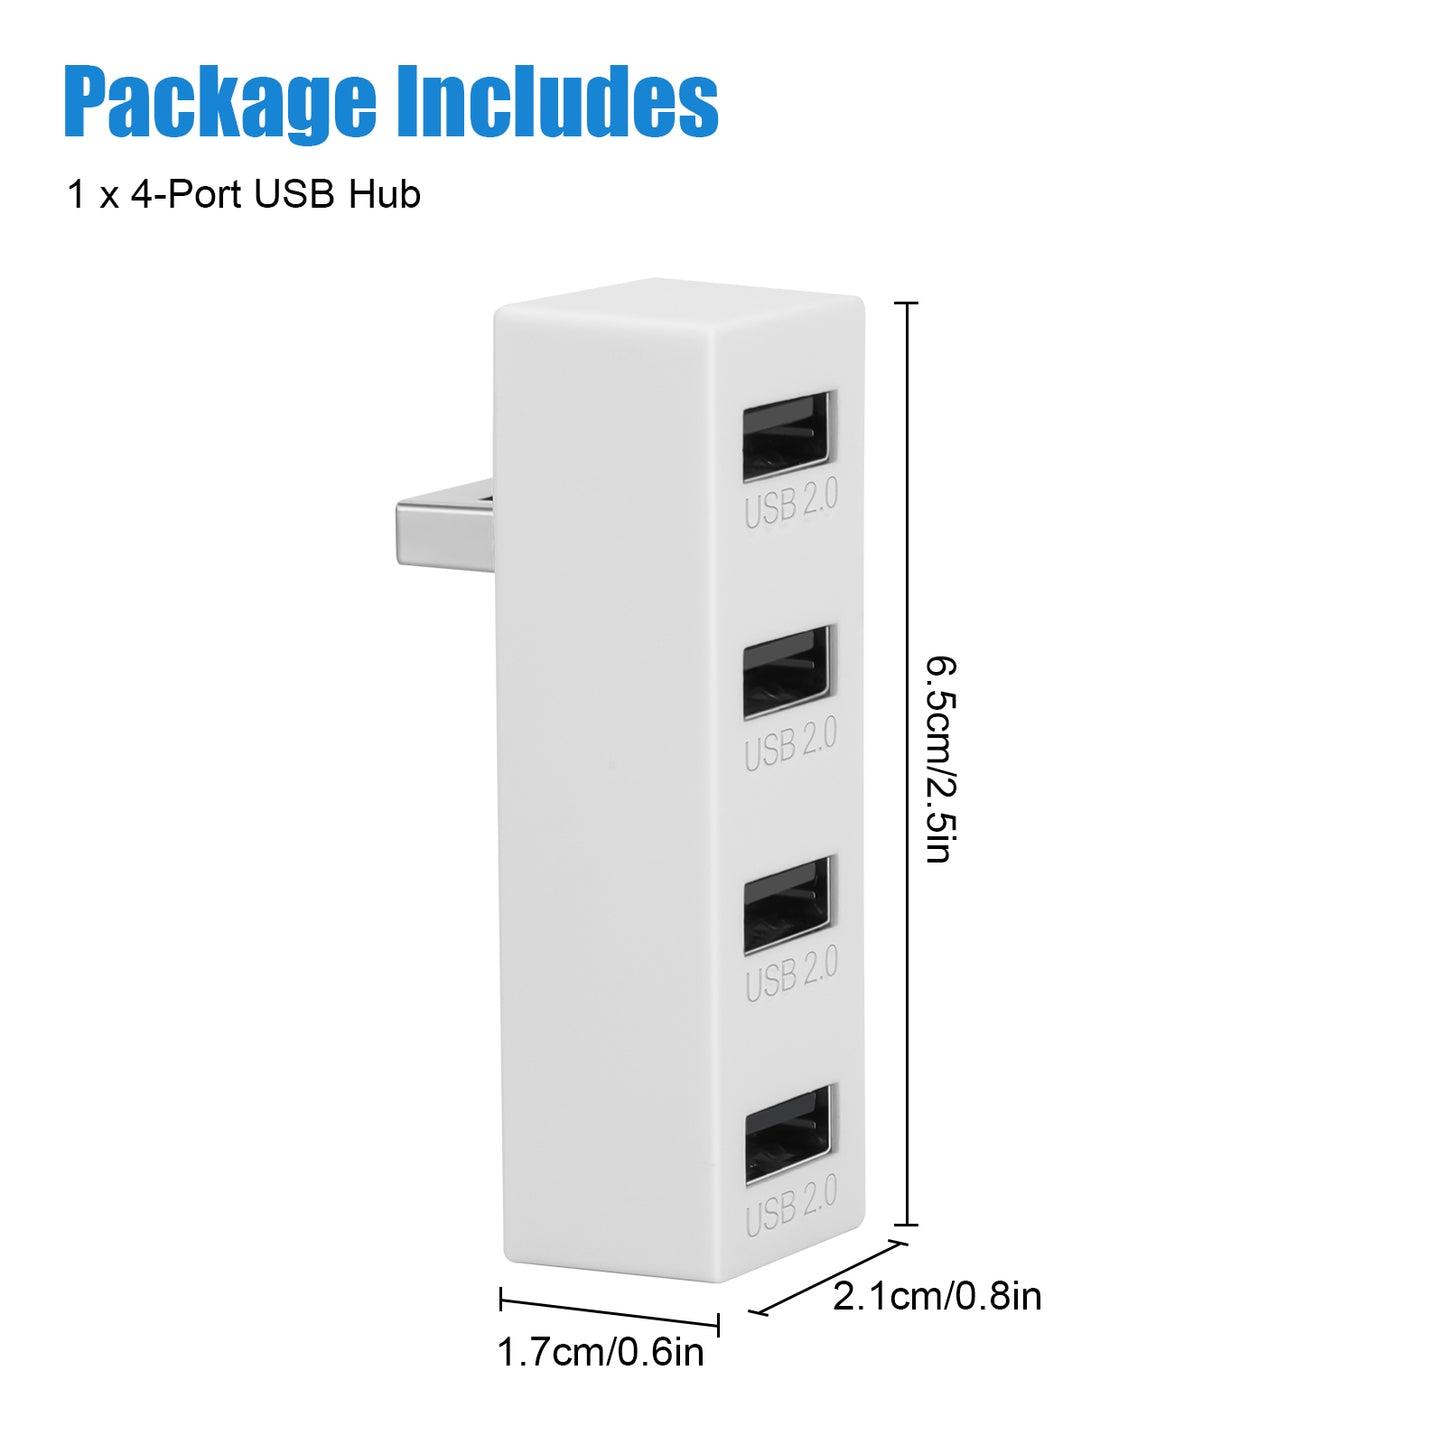 4 Ports USB Hub 2.0 for Xbox Series S - Lightweight & Compact Design - Seamless Connectivity for Controllers, Keyboards, and More,Stable Data Transmission, Plug and Play Convenience（white）